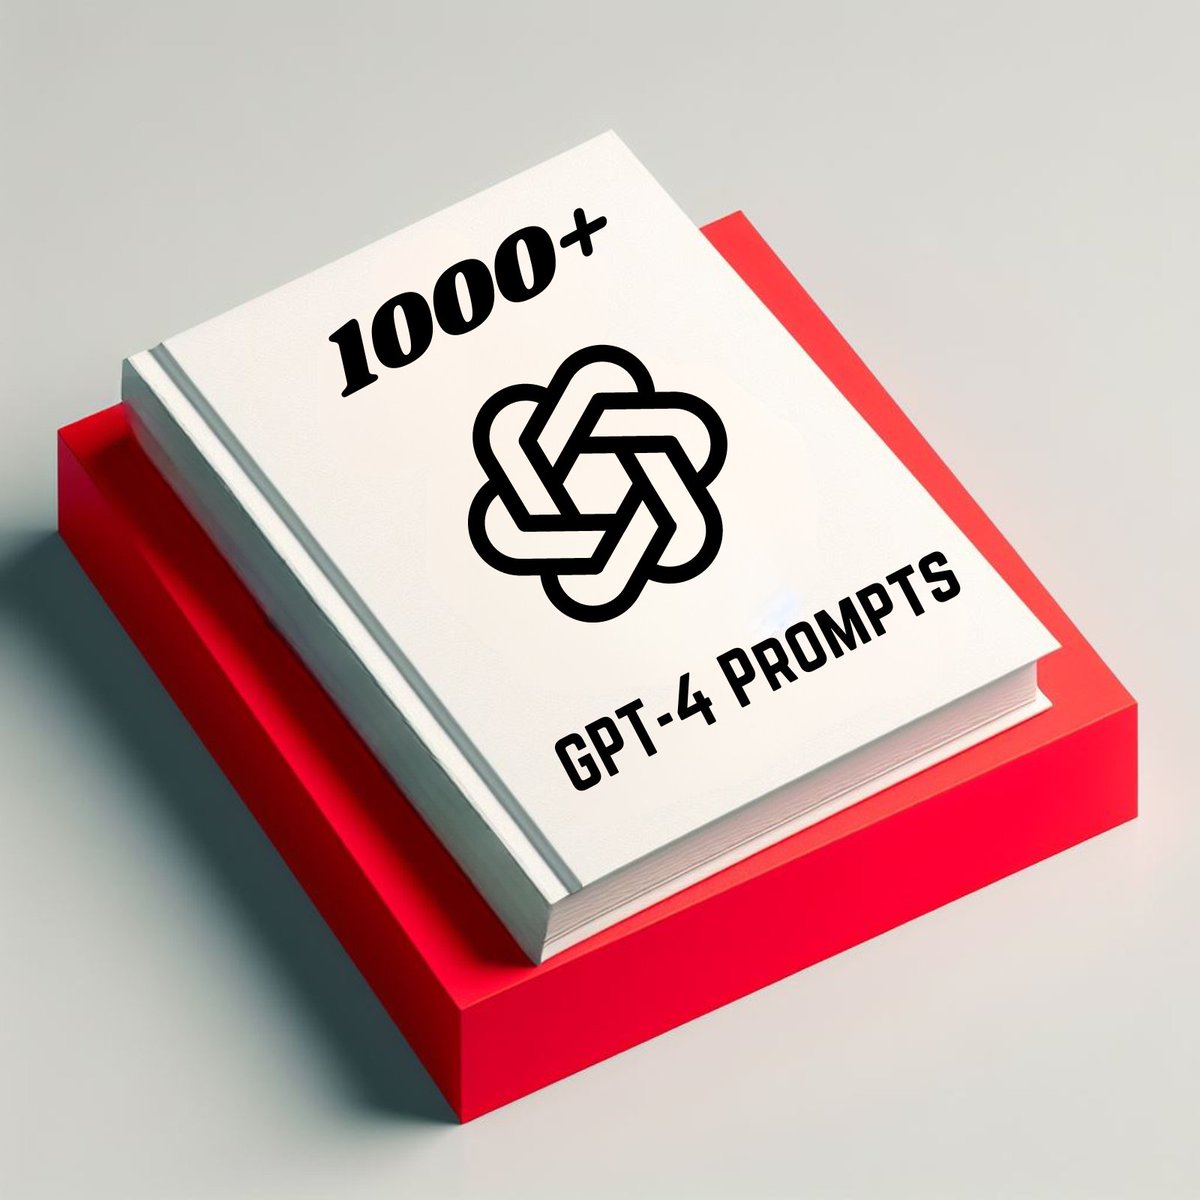 Prompt engineers make $100k-$300k yearly!

I built '1000+ GPT-4 Prompts'

• 1000+ Prompts
• 5000+ AI Tools
• Tips, Tricks, & Techniques.

And for 24 hours, it's 100% FREE!

To get it, just:

1. Like /Retweet
2. Reply 'GPT'
3. Follow me (So I can DM)